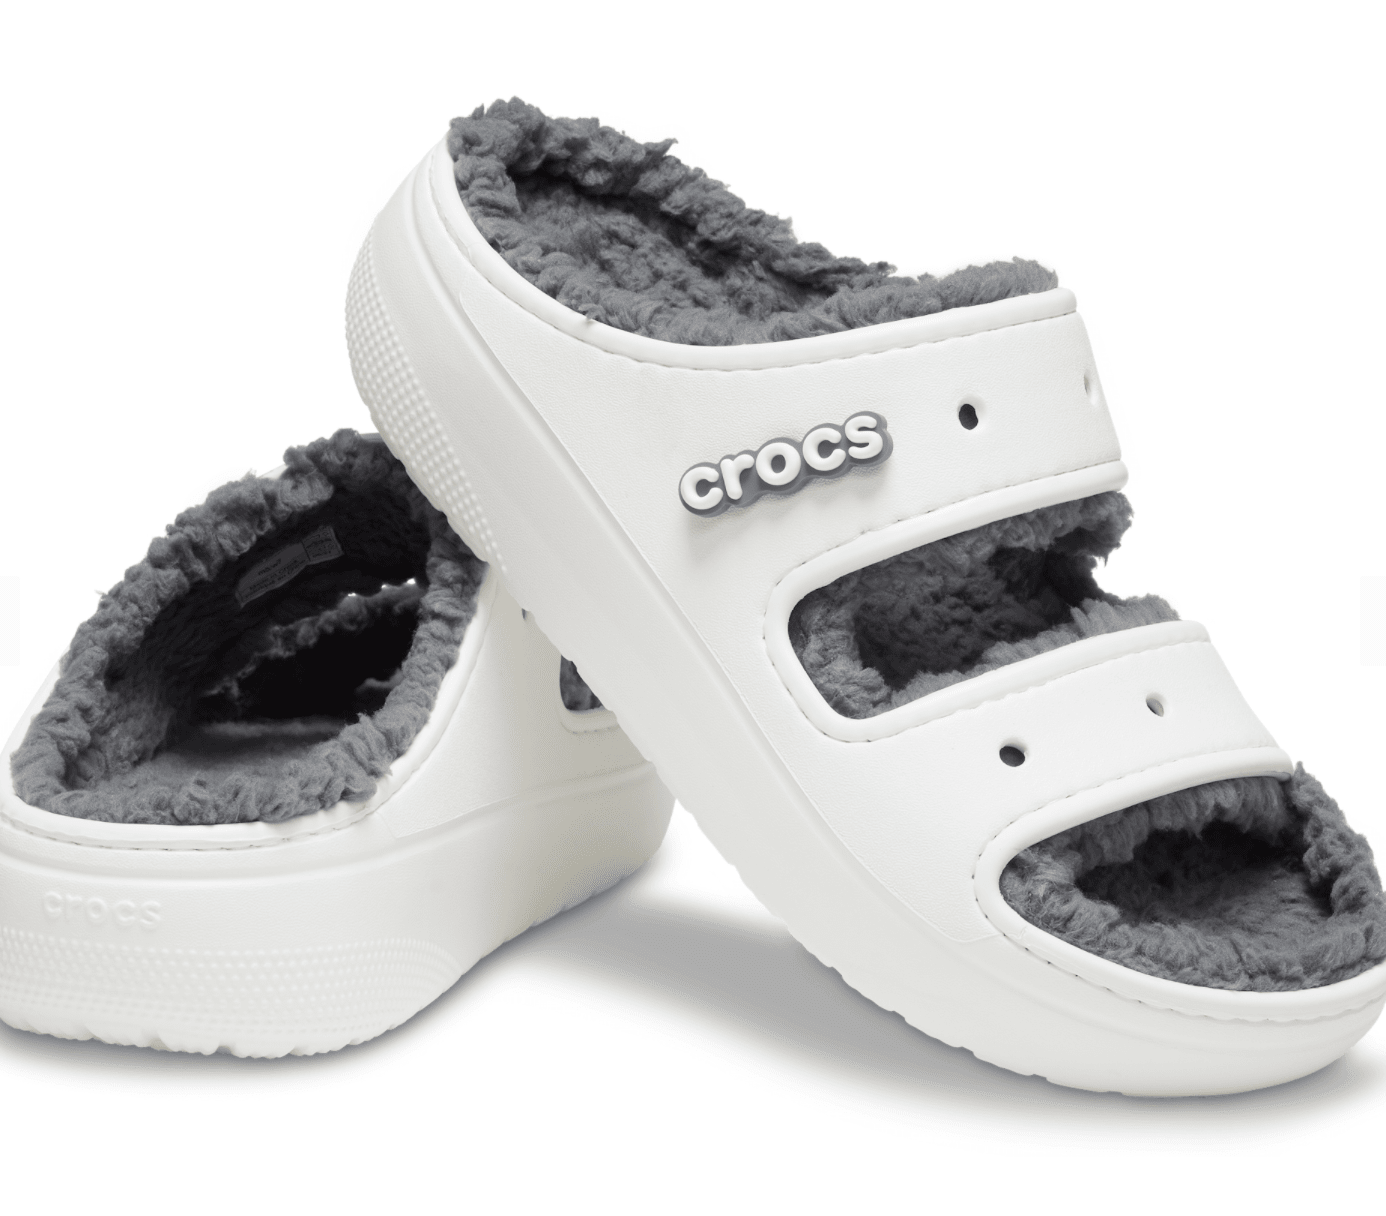 Crocs' Classic Cozzzy Sandals just launched, and we're in love